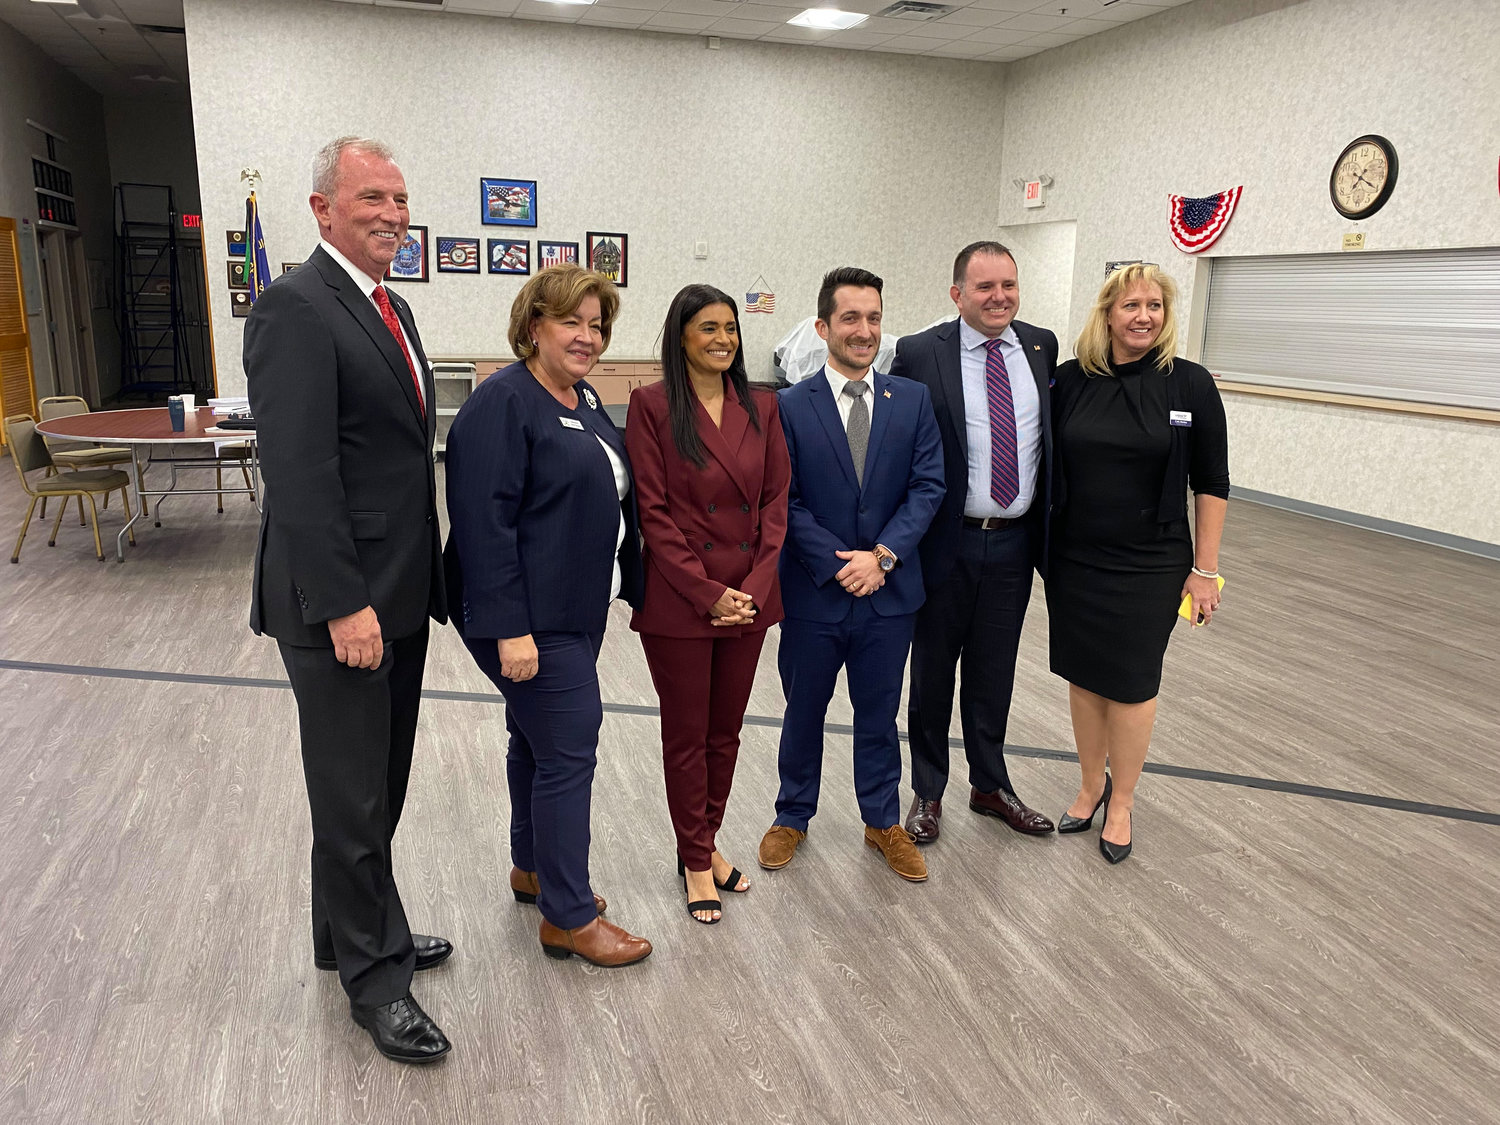 From left to right: Eric Mock (Seat 4 candidate), Commissioner Diane Velazquez (Seat 2 candidate/incumbent), Laverne McGee - Forum Moderator, Nick Nesta (Seat 4 candidate), Wes Dumey (Seat 2 candidate), and Apopka Area Chamber President Cate Manley after the city commission forum.